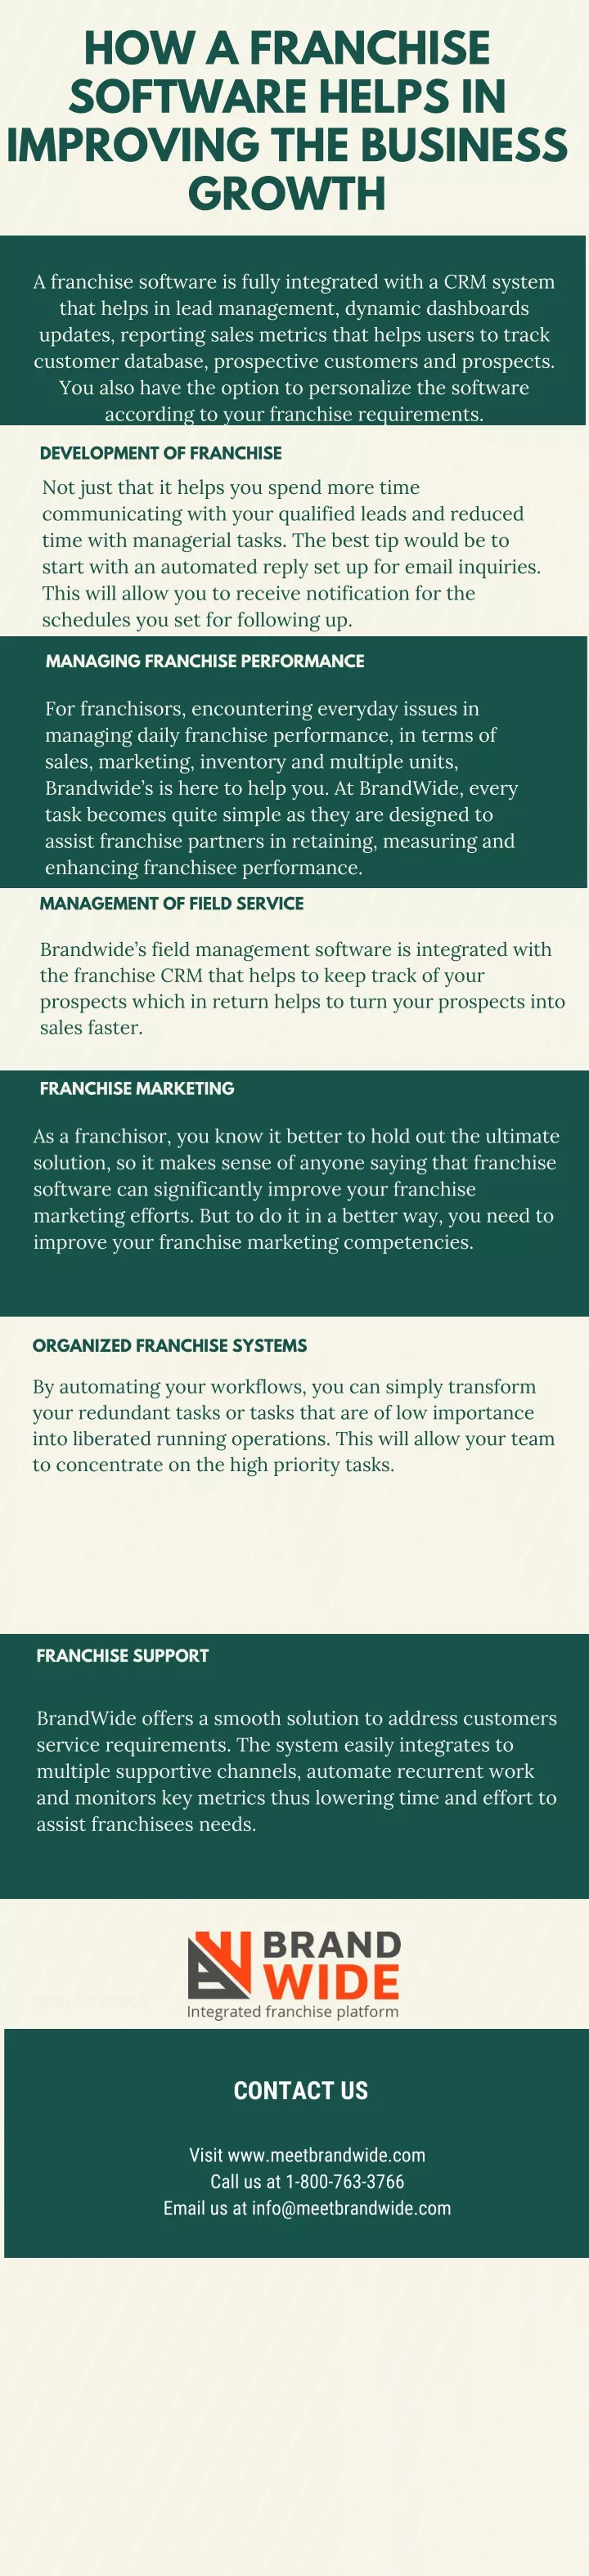 how a franchise software helps in improving